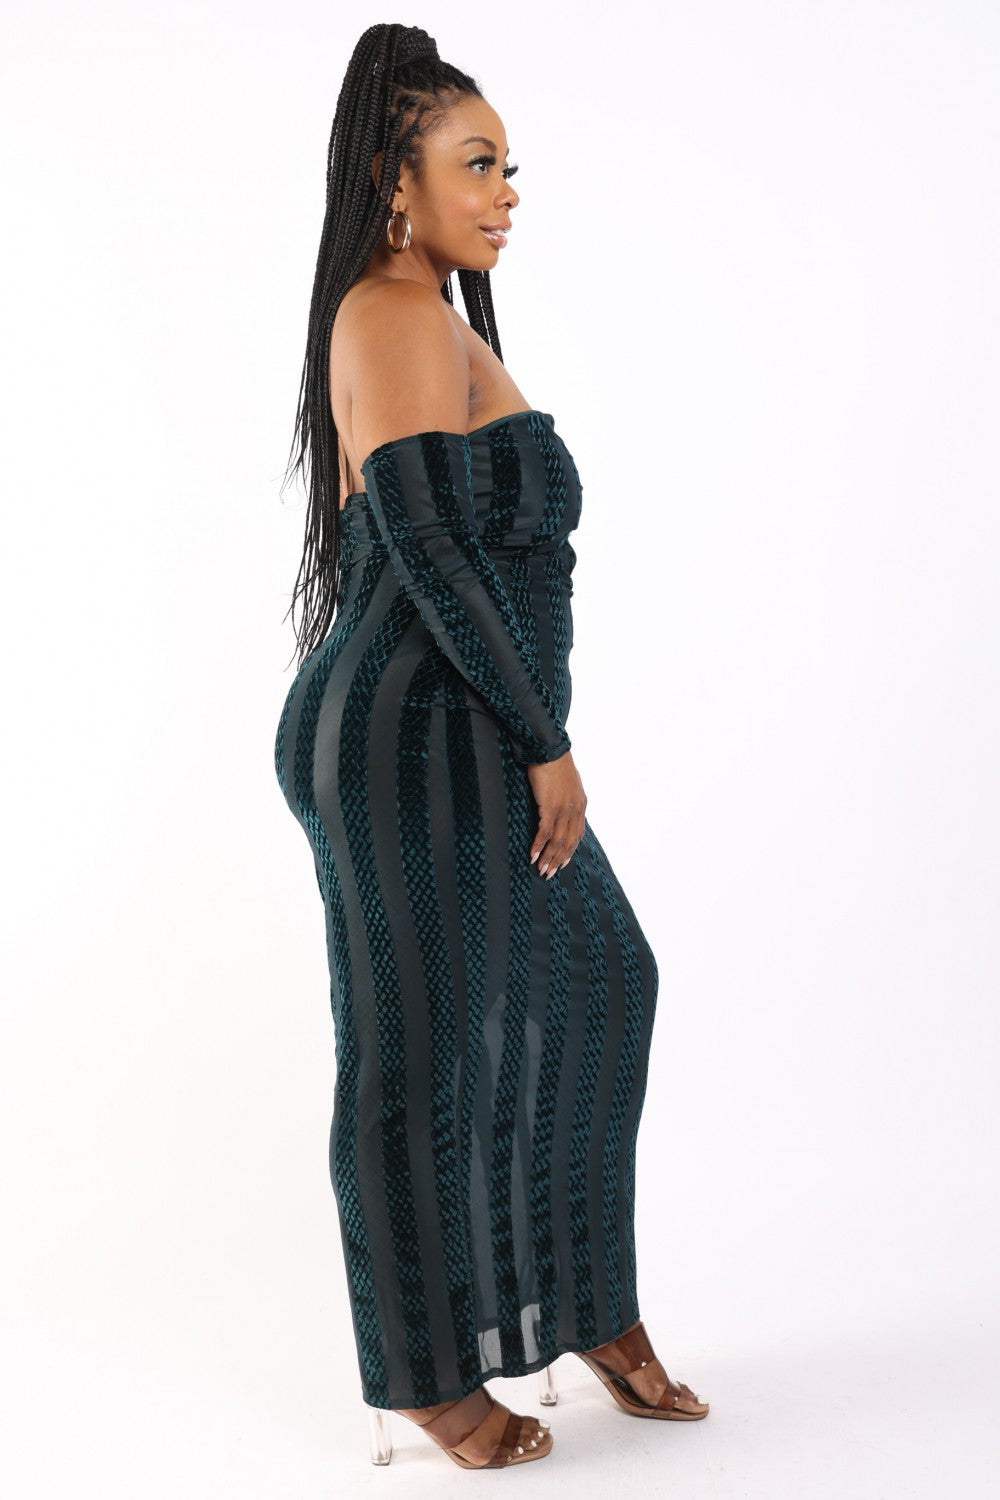 Hunter Off The Shoulder Striped Velvet Maxi Dress - Shopping Therapy 3XL Maxi Dresses